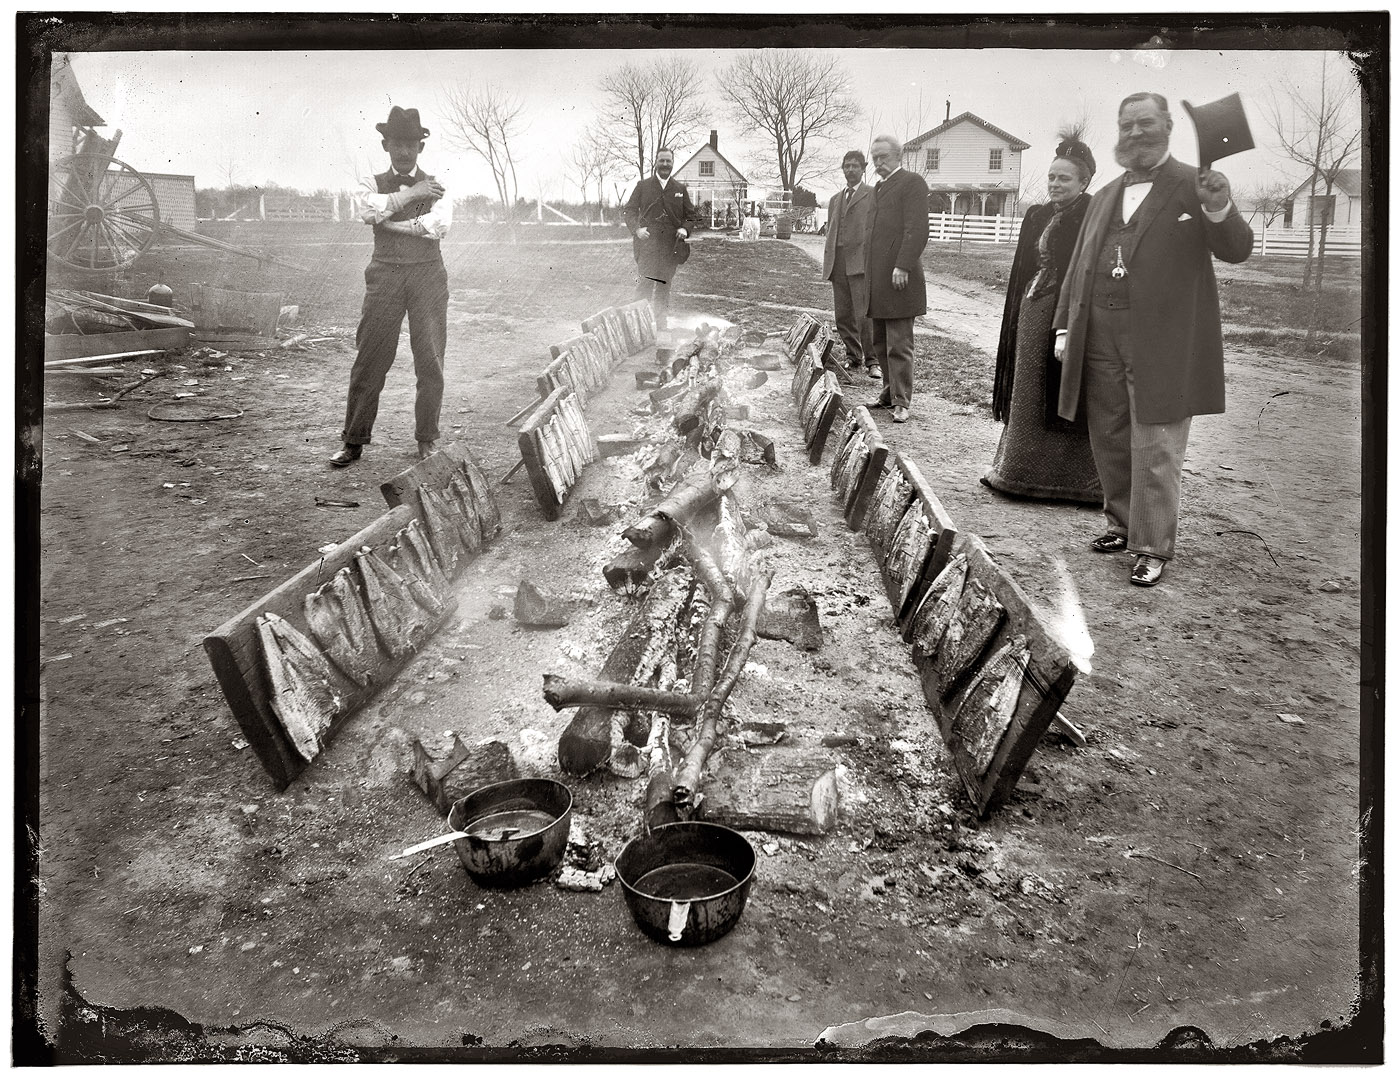 Barbecue at Marshall Hall, Maryland, in 1893. View full size. Photograph by William Cruikshank. Marshall Hall, an estate on the Potomac opposite Mount Vernon, had a boat landing and was popular with day-trippers from Washington.